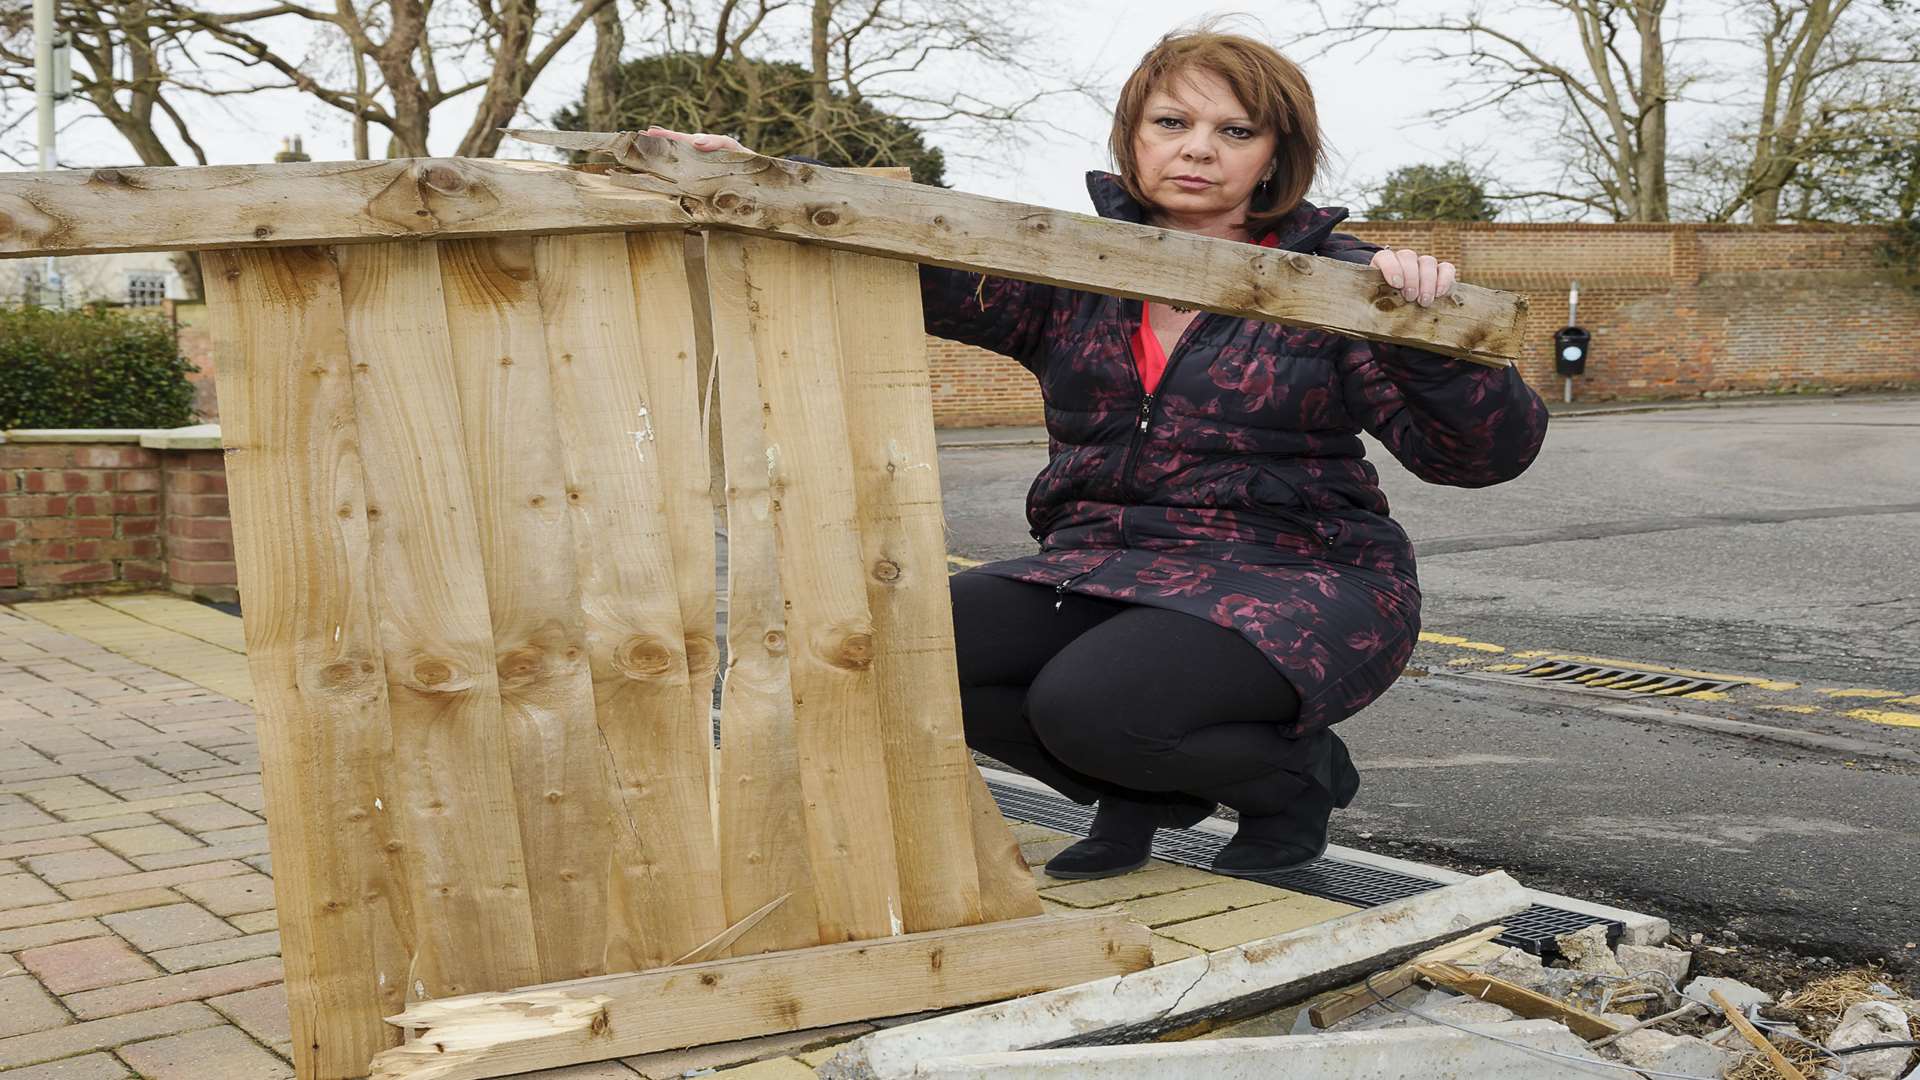 Suzanne Mayes with the damaged fencing outside her home